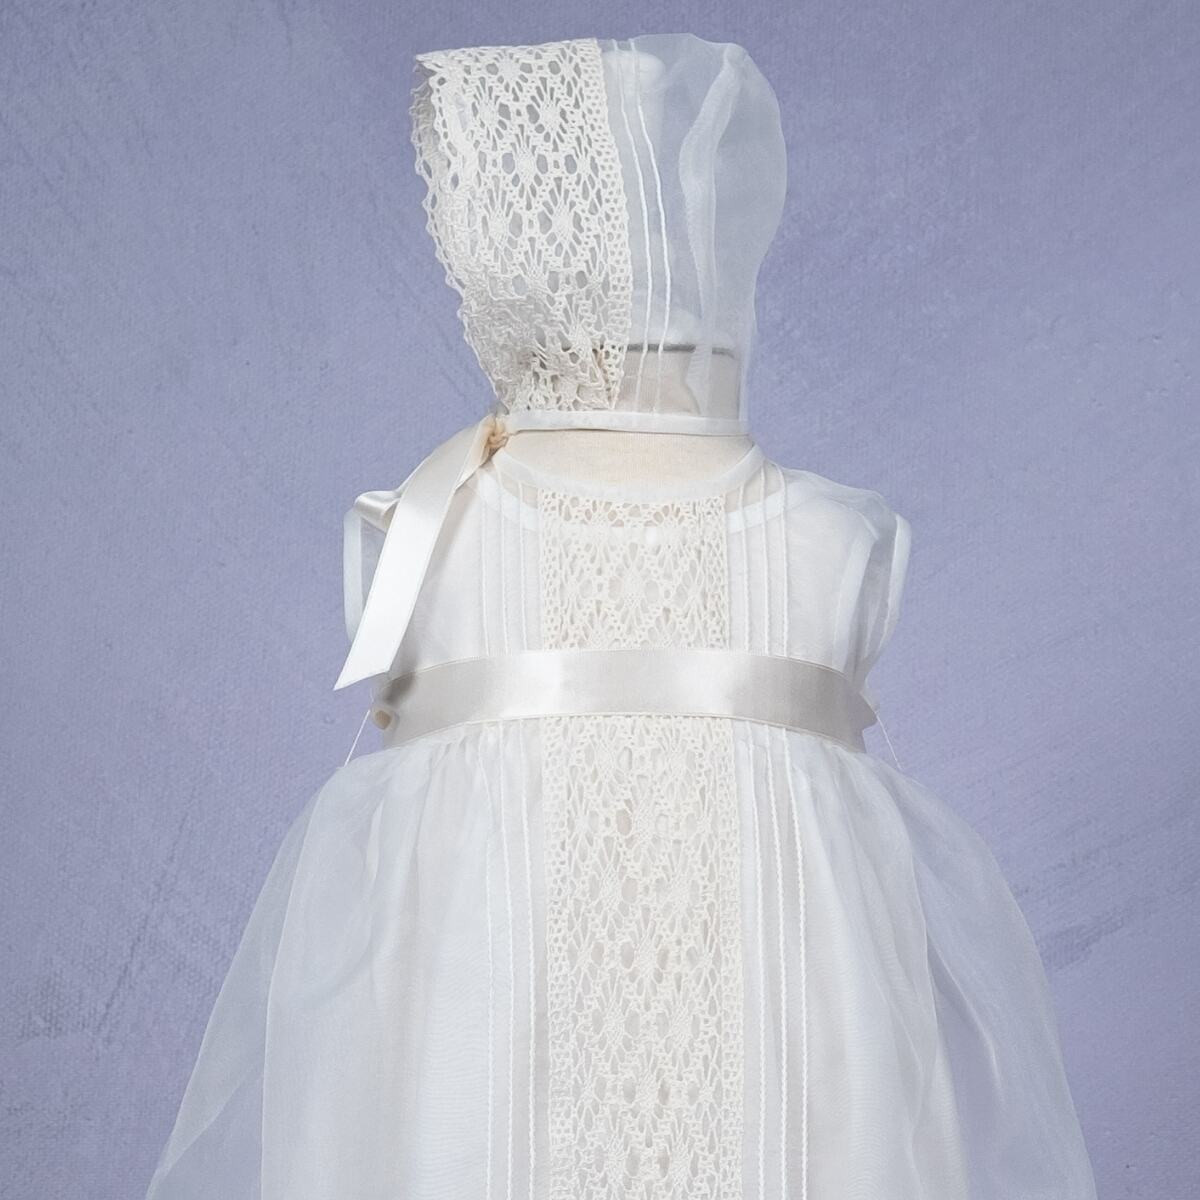 CHRISTENING GOWN WITH LACE AND BONNET MISHA BABY - 4